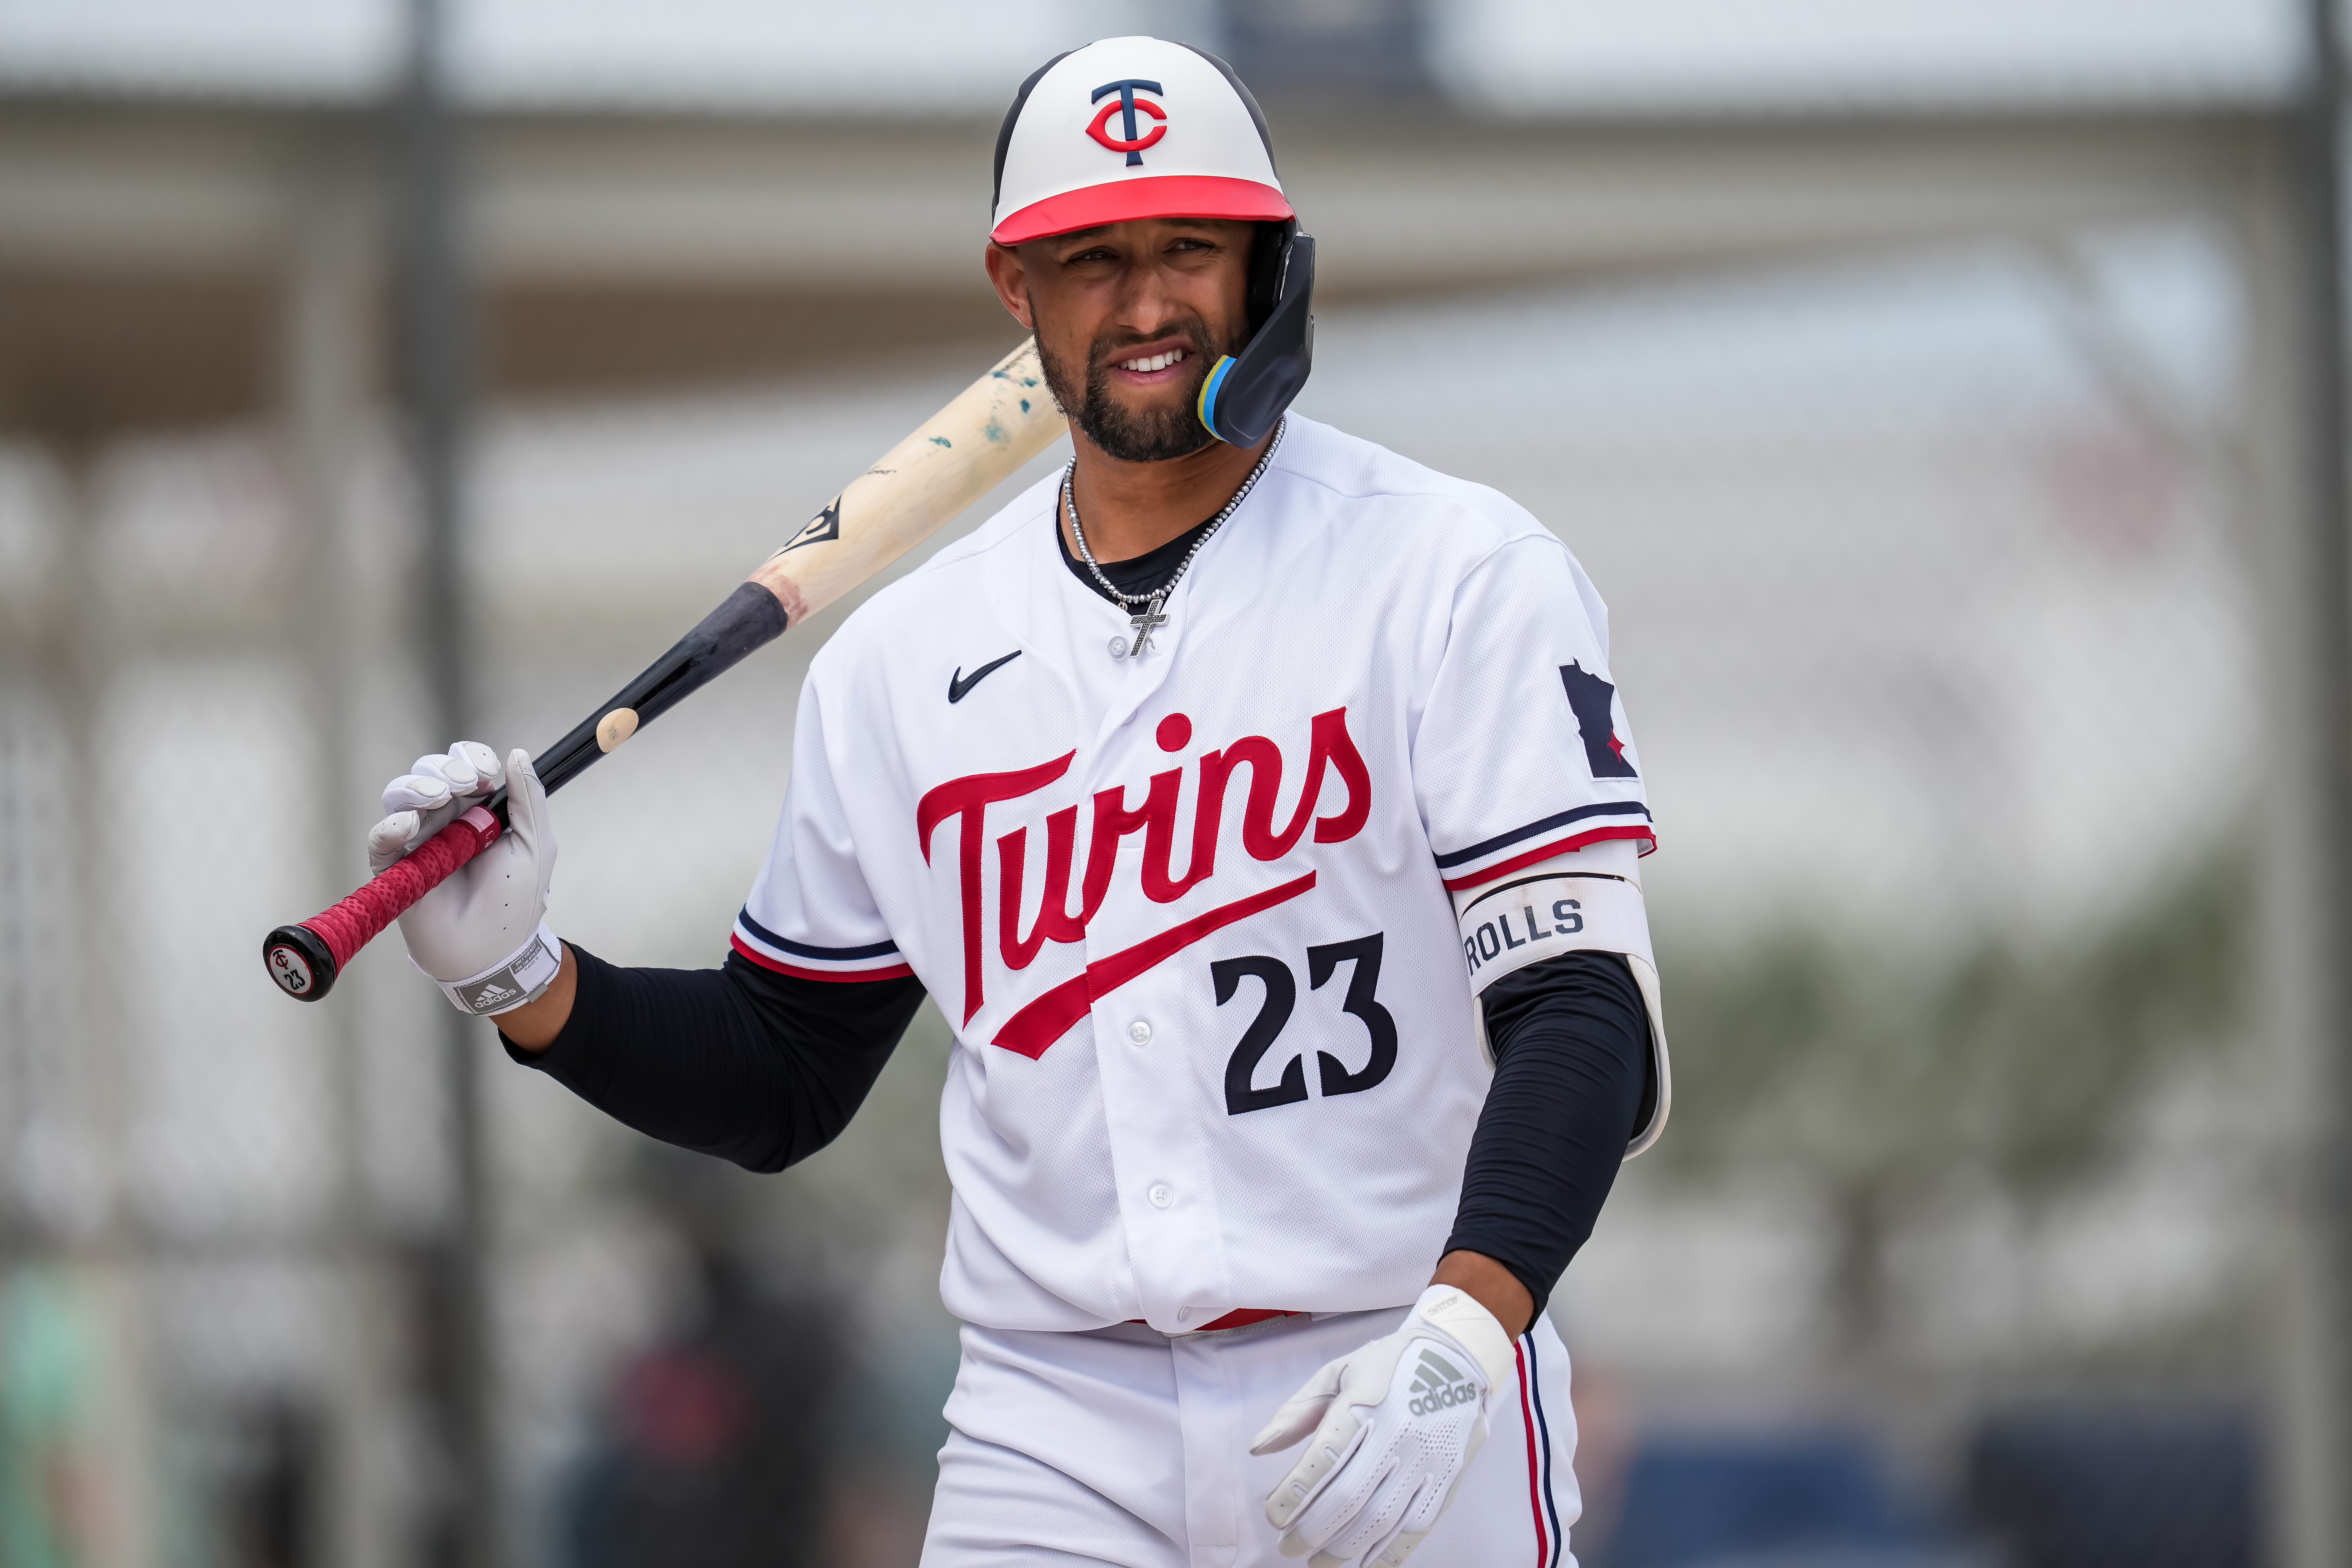 Royce Lewis of the Minnesota Twins looks on prior to a spring training game against the Atlanta Braves on March 19, 2023 at Hammond Stadium in Fort Myers, Florida.